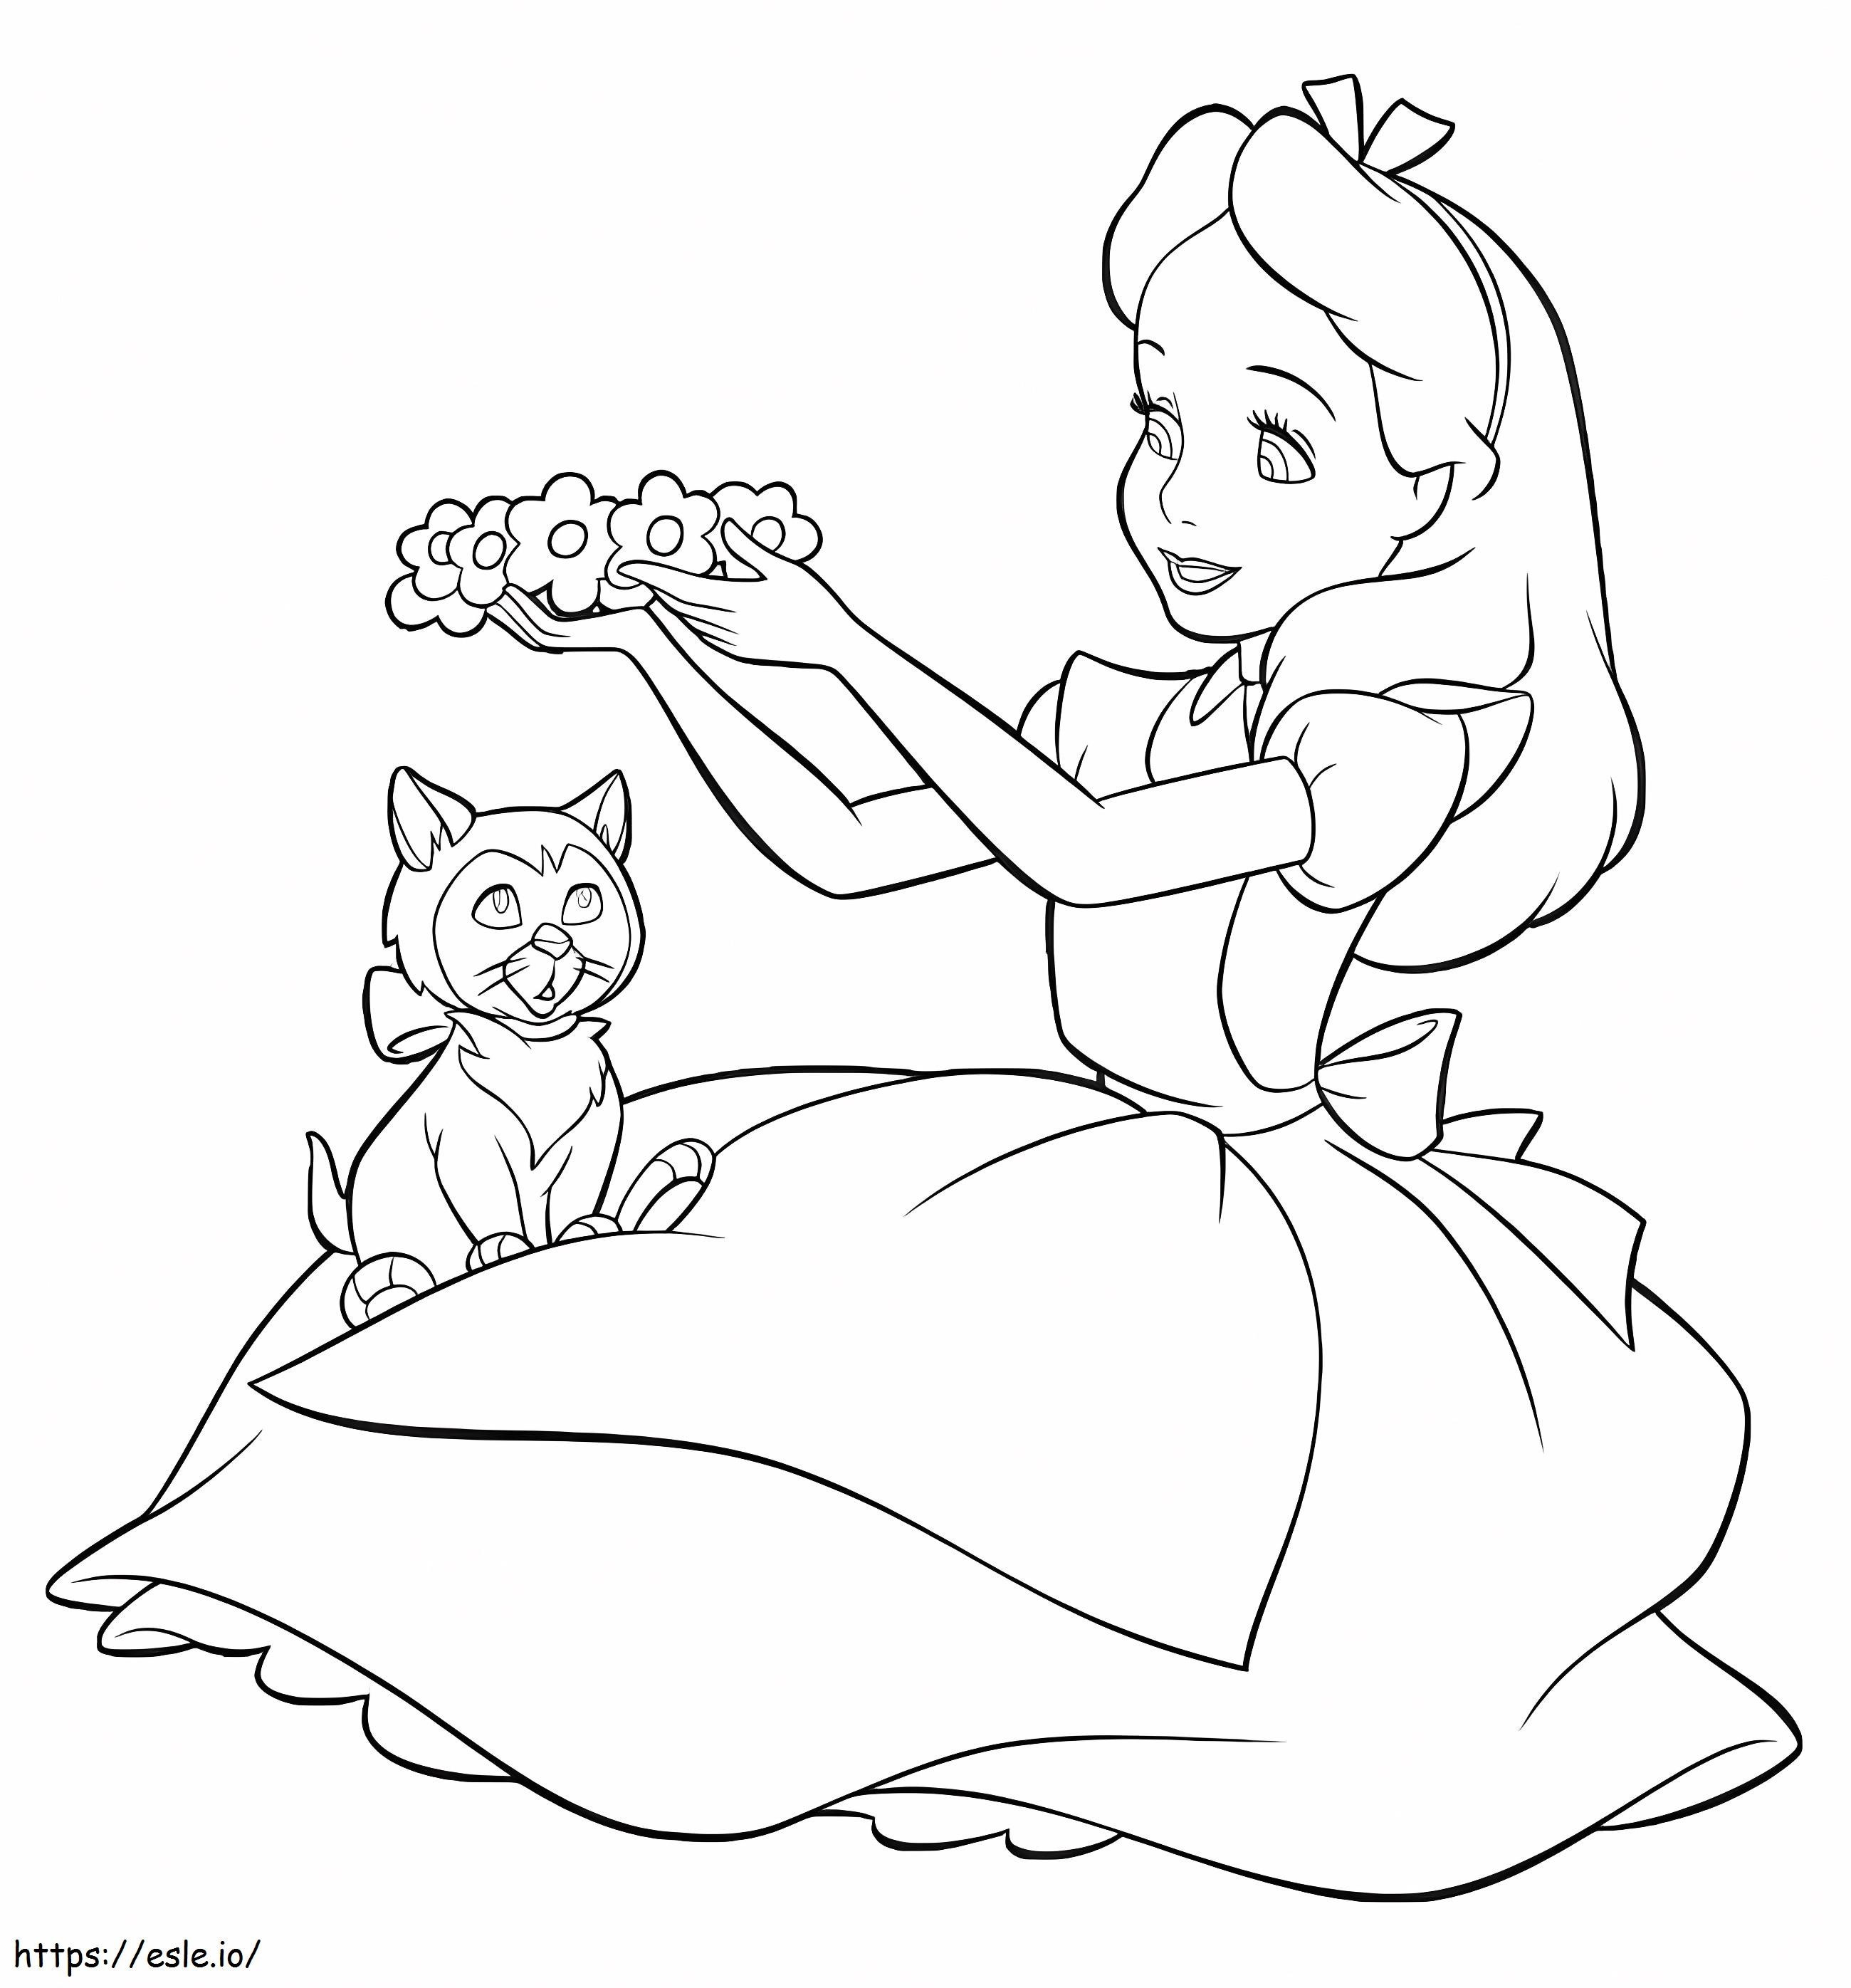 Alice And Kitten coloring page